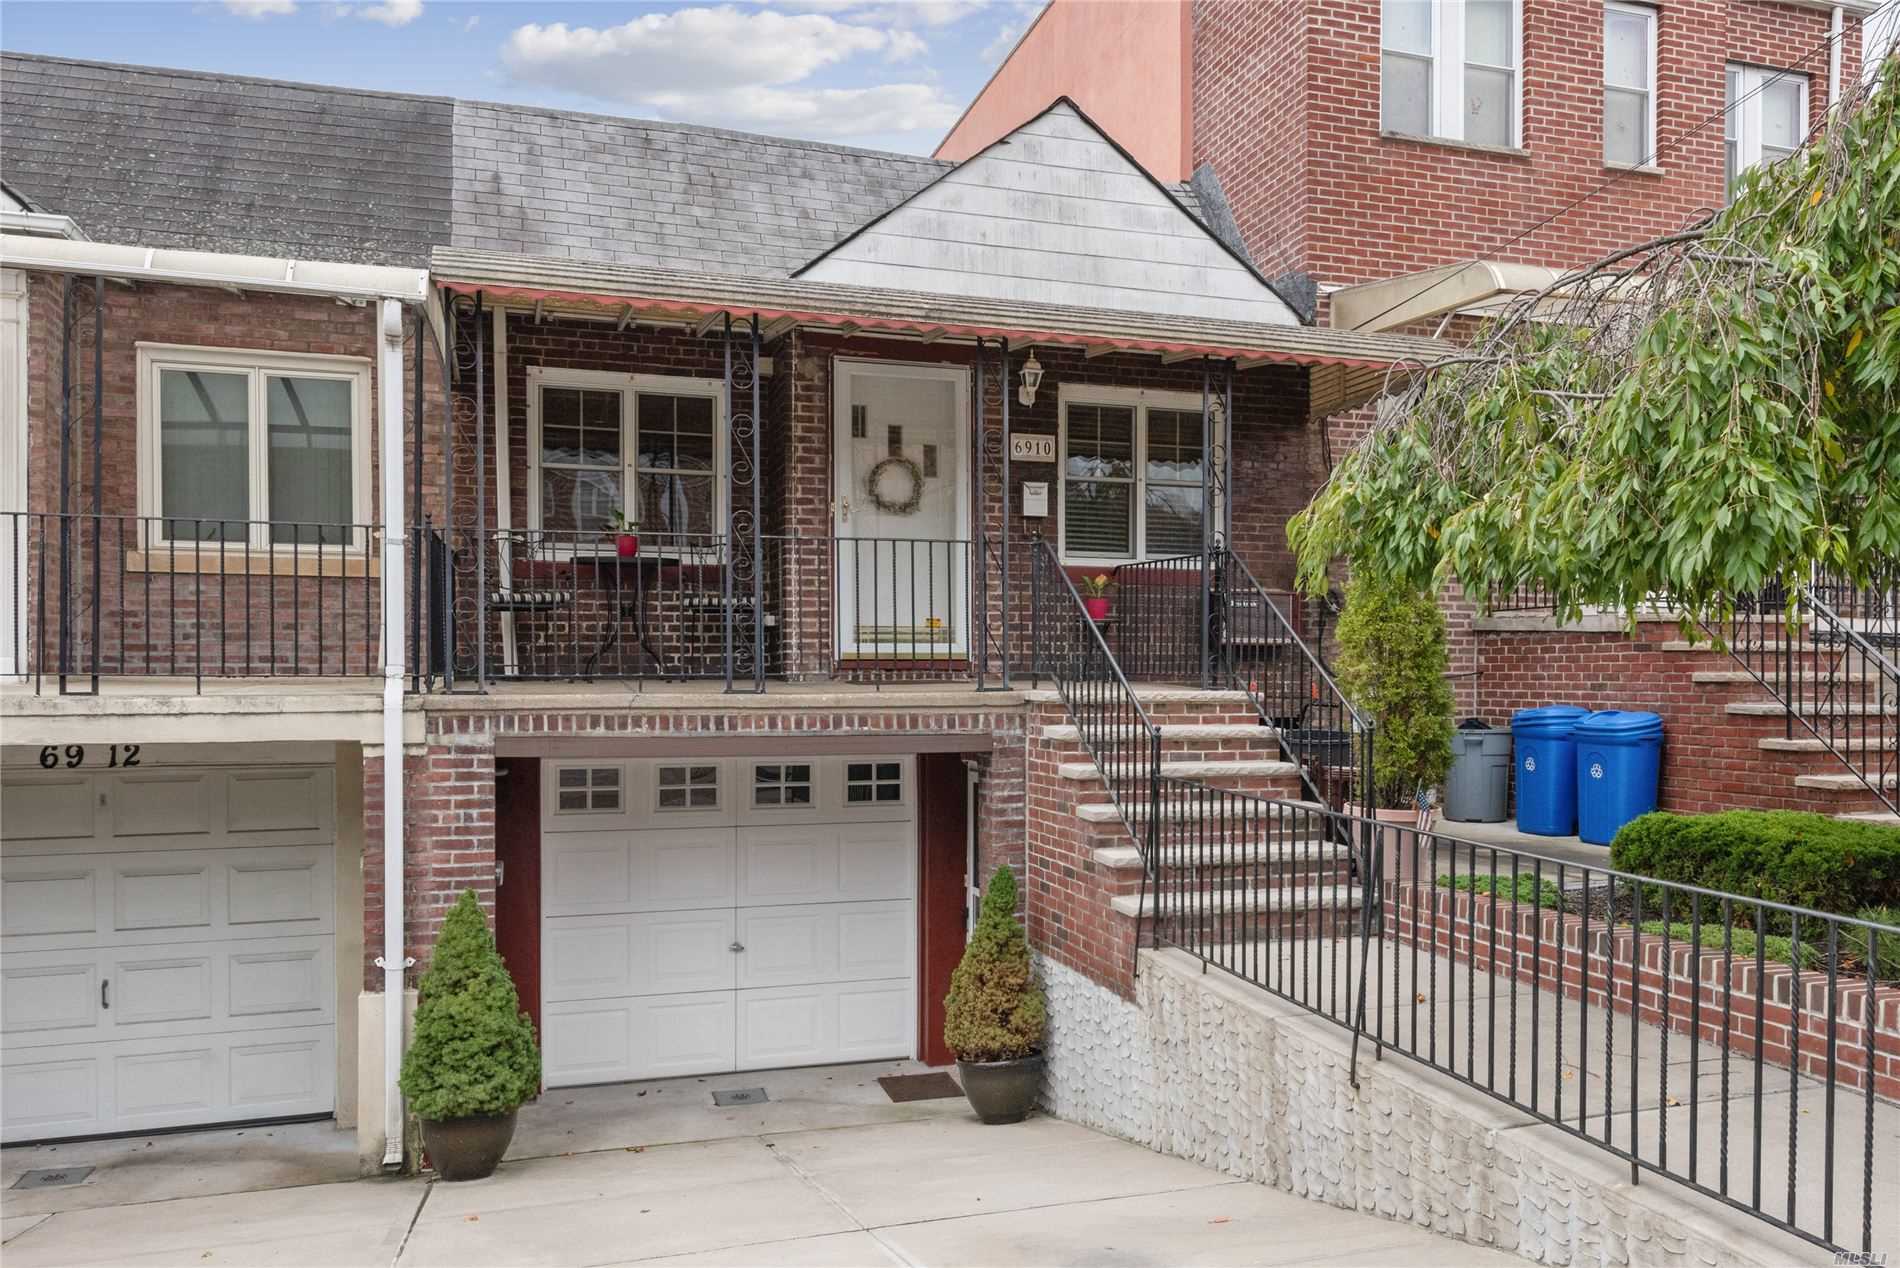 Welcome home to this renovated turn key 20&rsquo; hi ranch located 1/2 blk to PS 128 & 2 blks to Juniper Pk. This home features a mod kitchen w/ s/s appl, granite ctrs, new FDR, LR & full bth on 1st fl. 2nd fl has 3 bdrms + large fam rm. & full bth. Pvt drwy & garage in front. New concrete in front, pavers in yard, above ground pool & sec system!